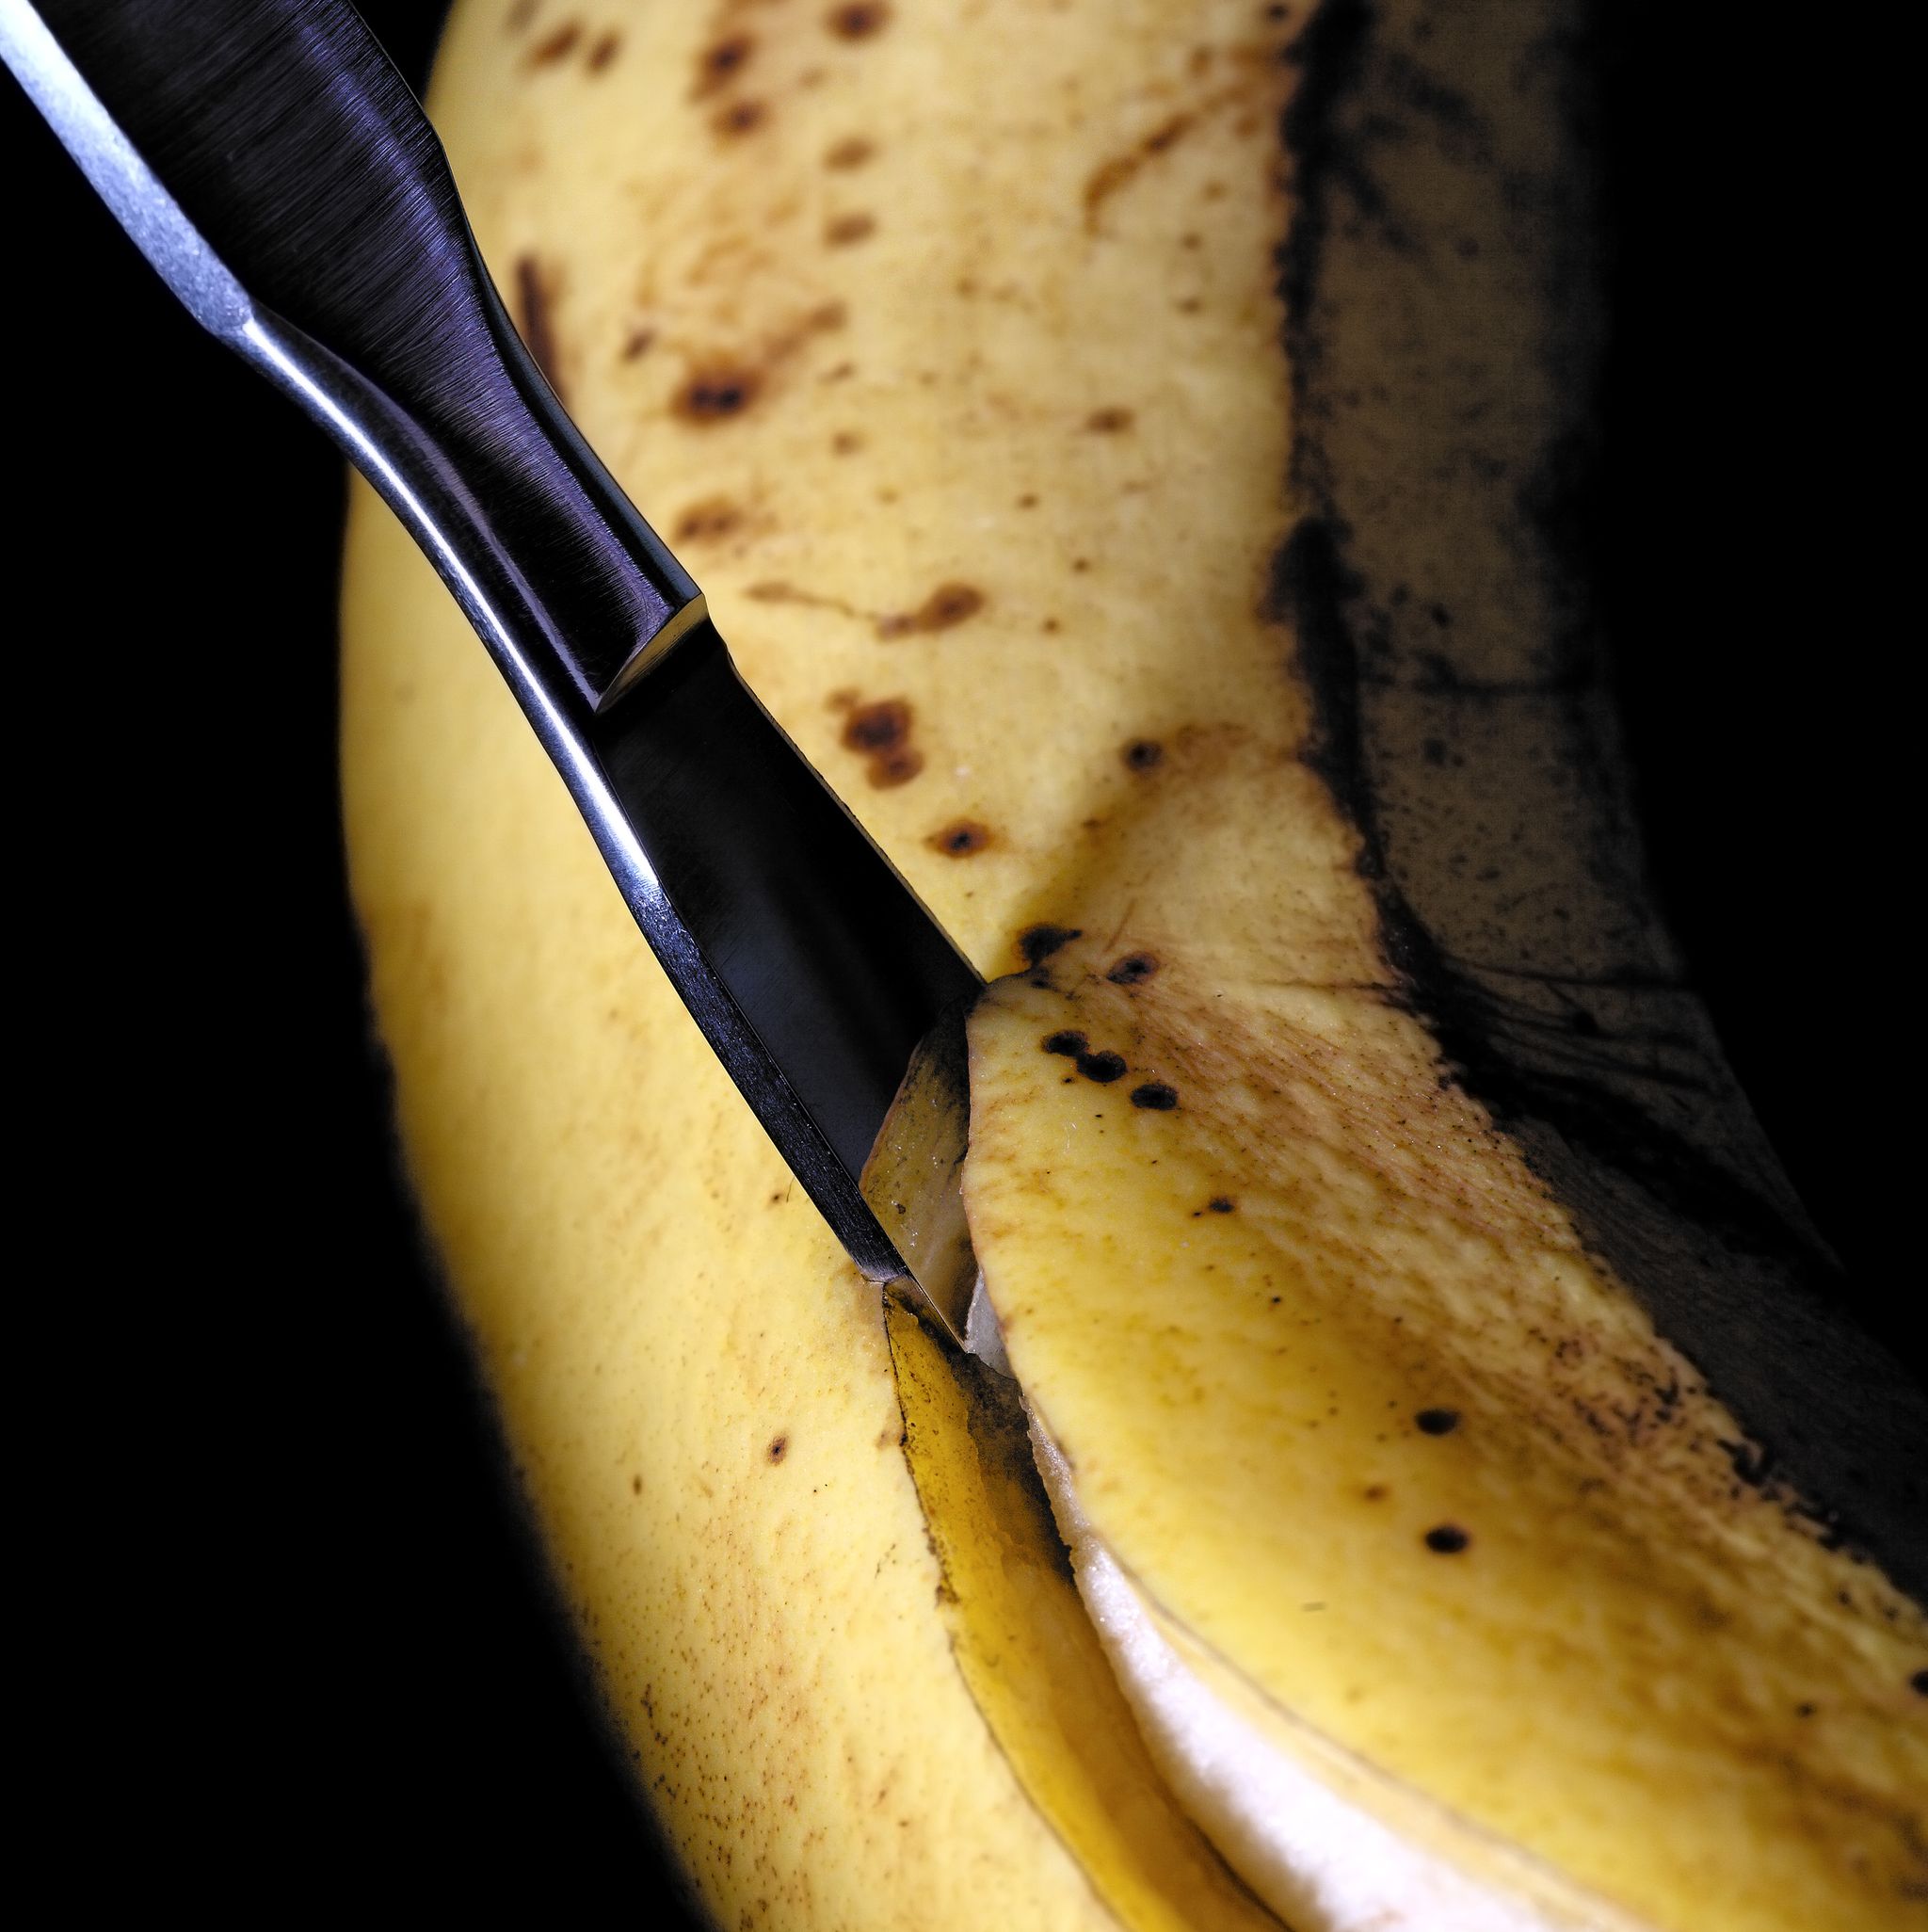 Cutting old banana with scalpel